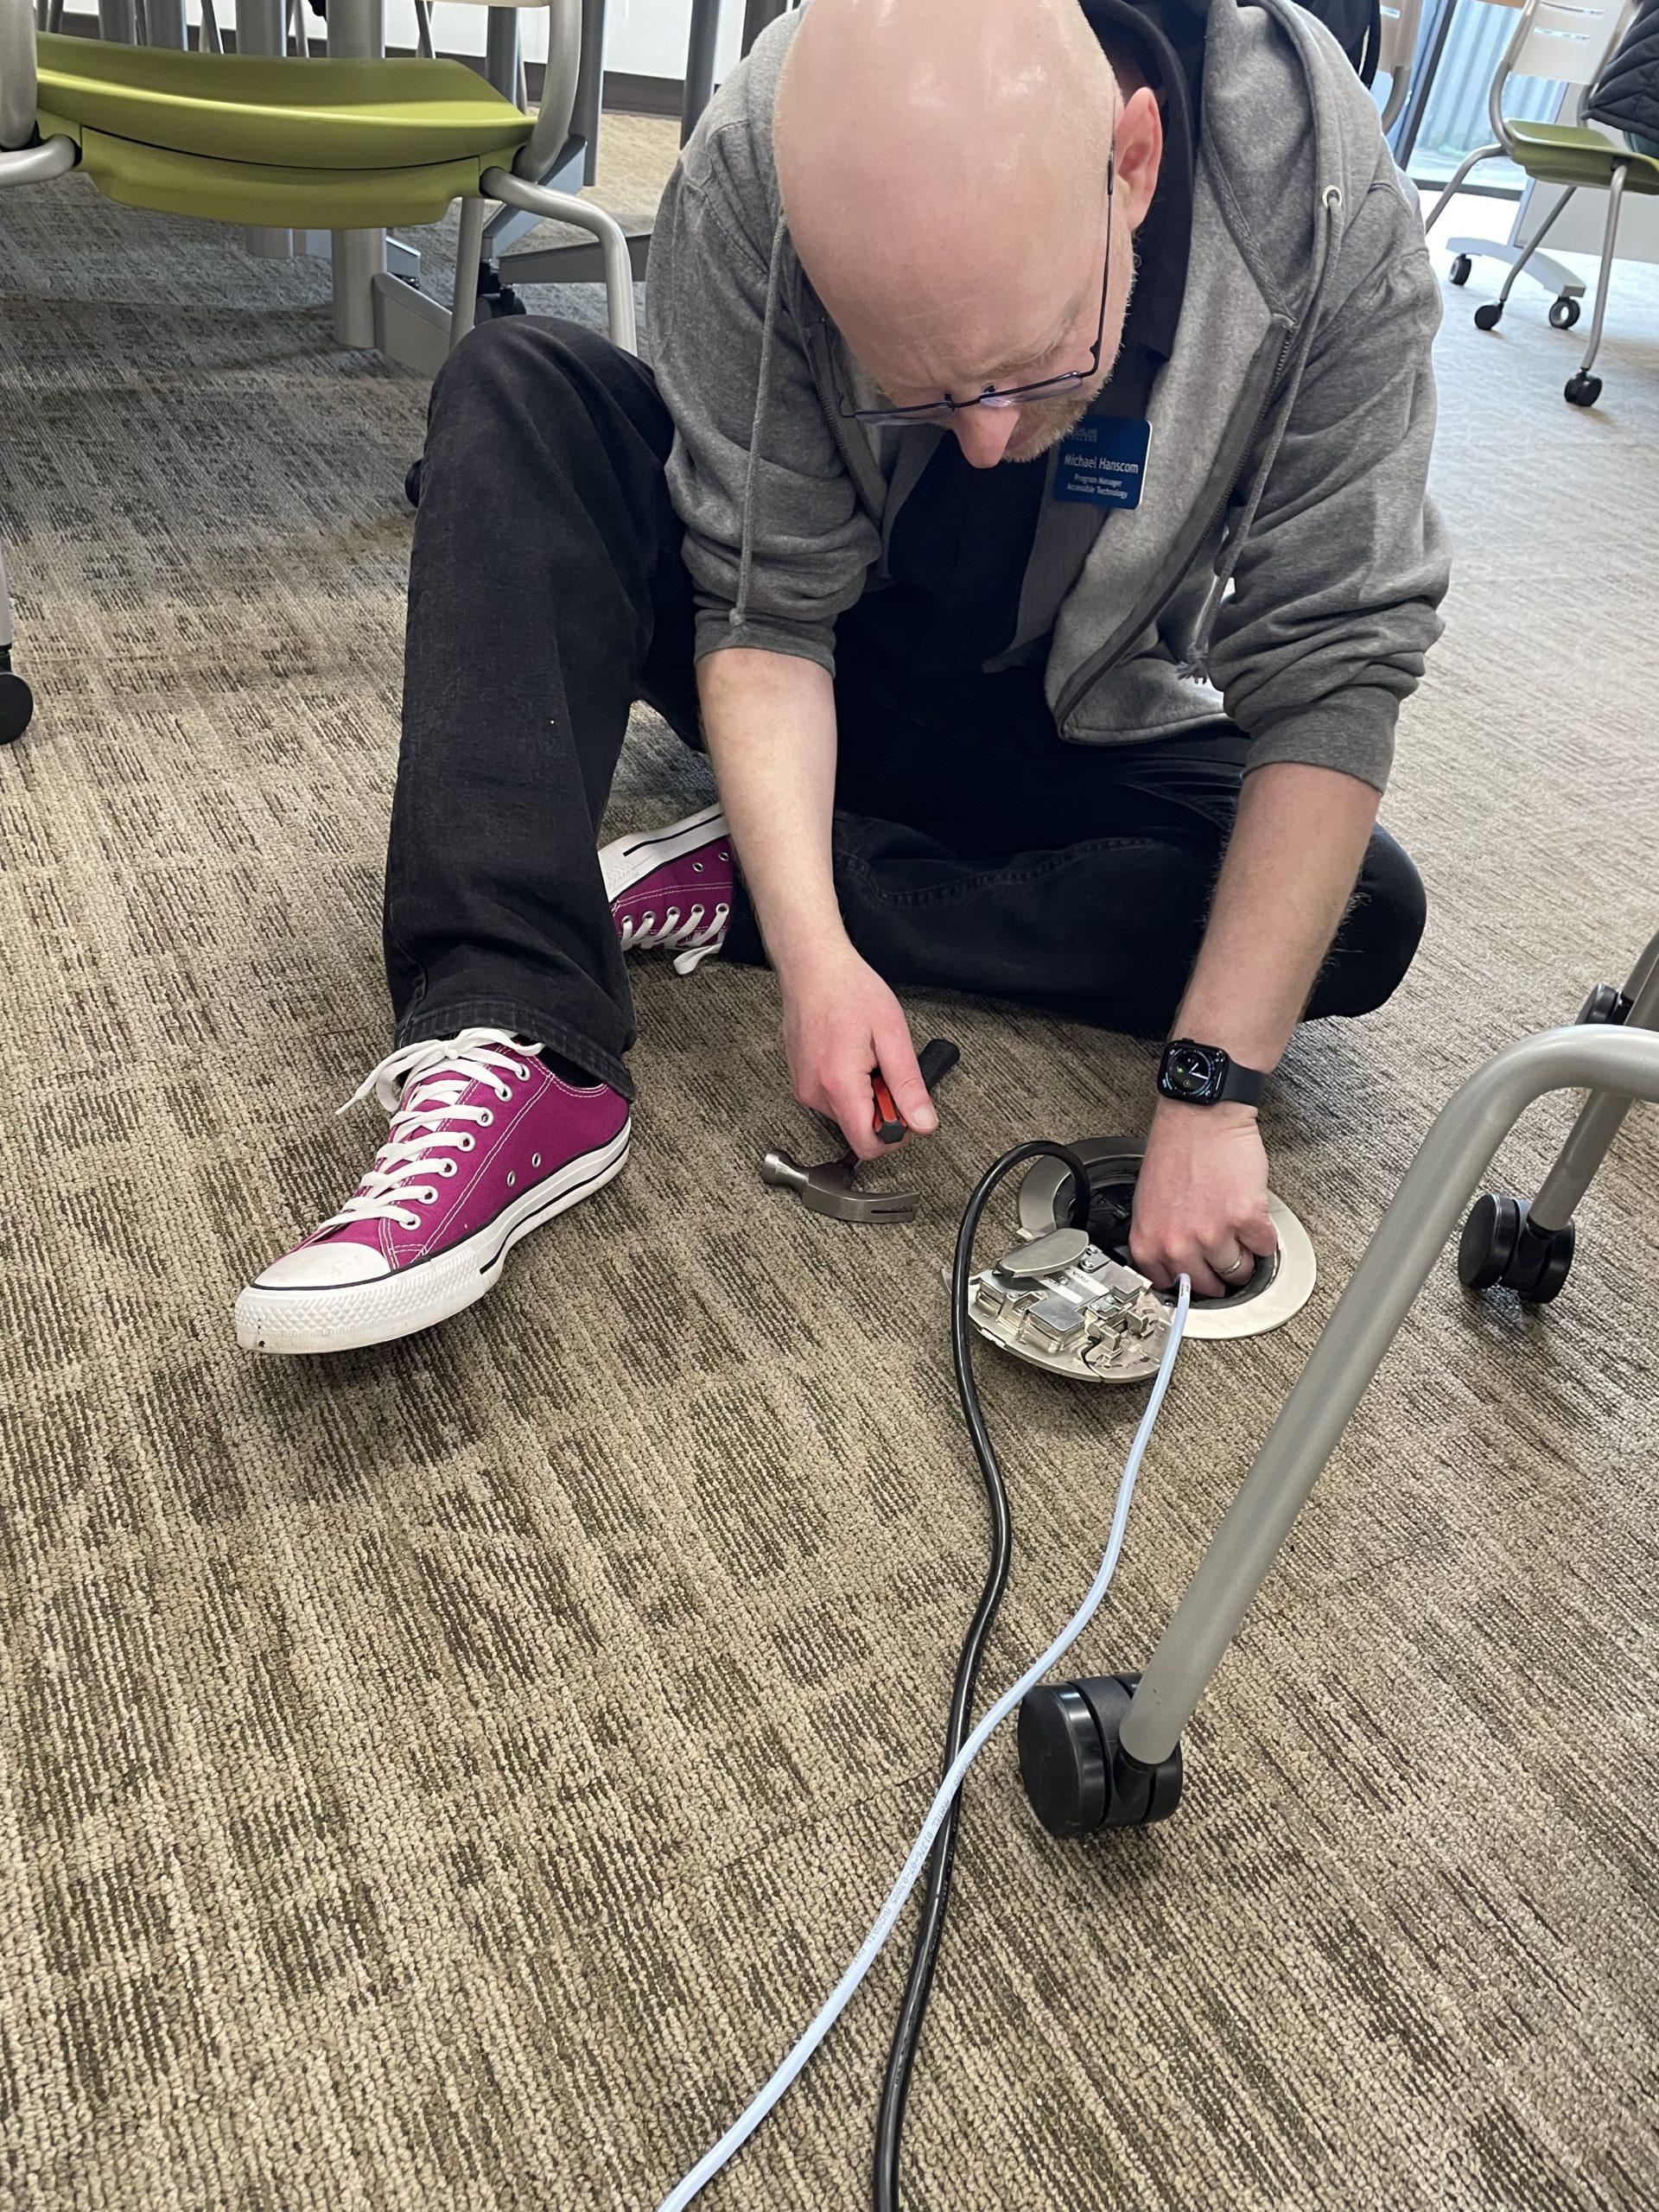 Me crouched on the floor of a classroom, holding a screwdriver in one hand as I reach into a power and network placement on the floor. A power cable and a network cable disappear into the placement.